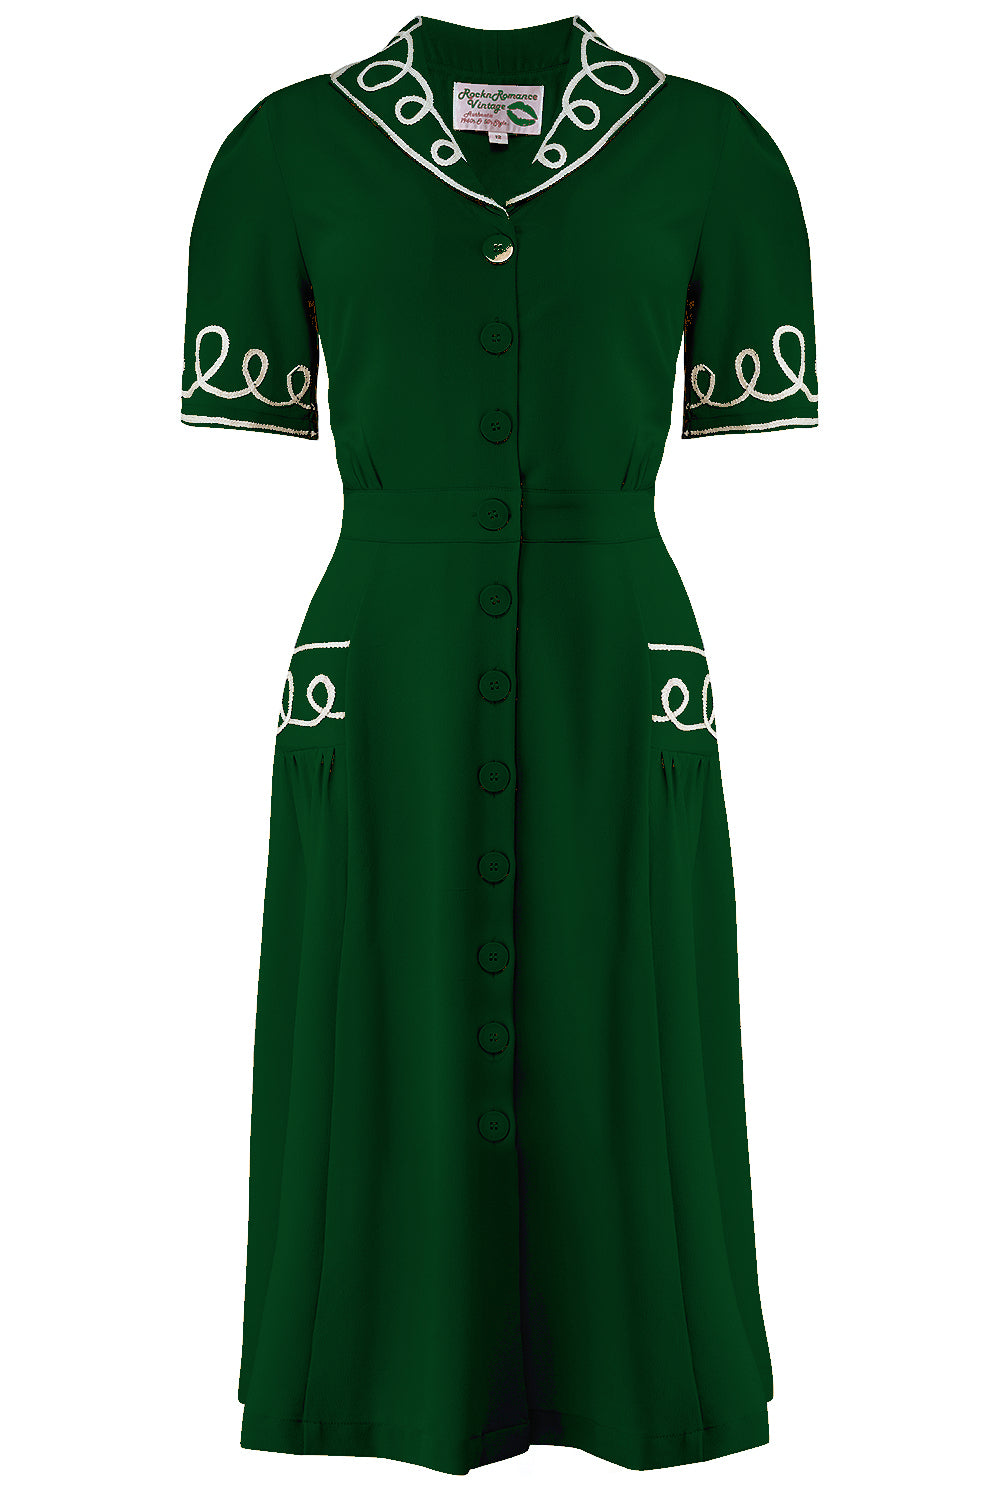 The "Loopy-Lou" Shirtwaister Dress in Green with Contrast RicRac, True 1950s Vintage Style - True and authentic vintage style clothing, inspired by the Classic styles of CC41 , WW2 and the fun 1950s RocknRoll era, for everyday wear plus events like Goodwood Revival, Twinwood Festival and Viva Las Vegas Rockabilly Weekend Rock n Romance Rock n Romance